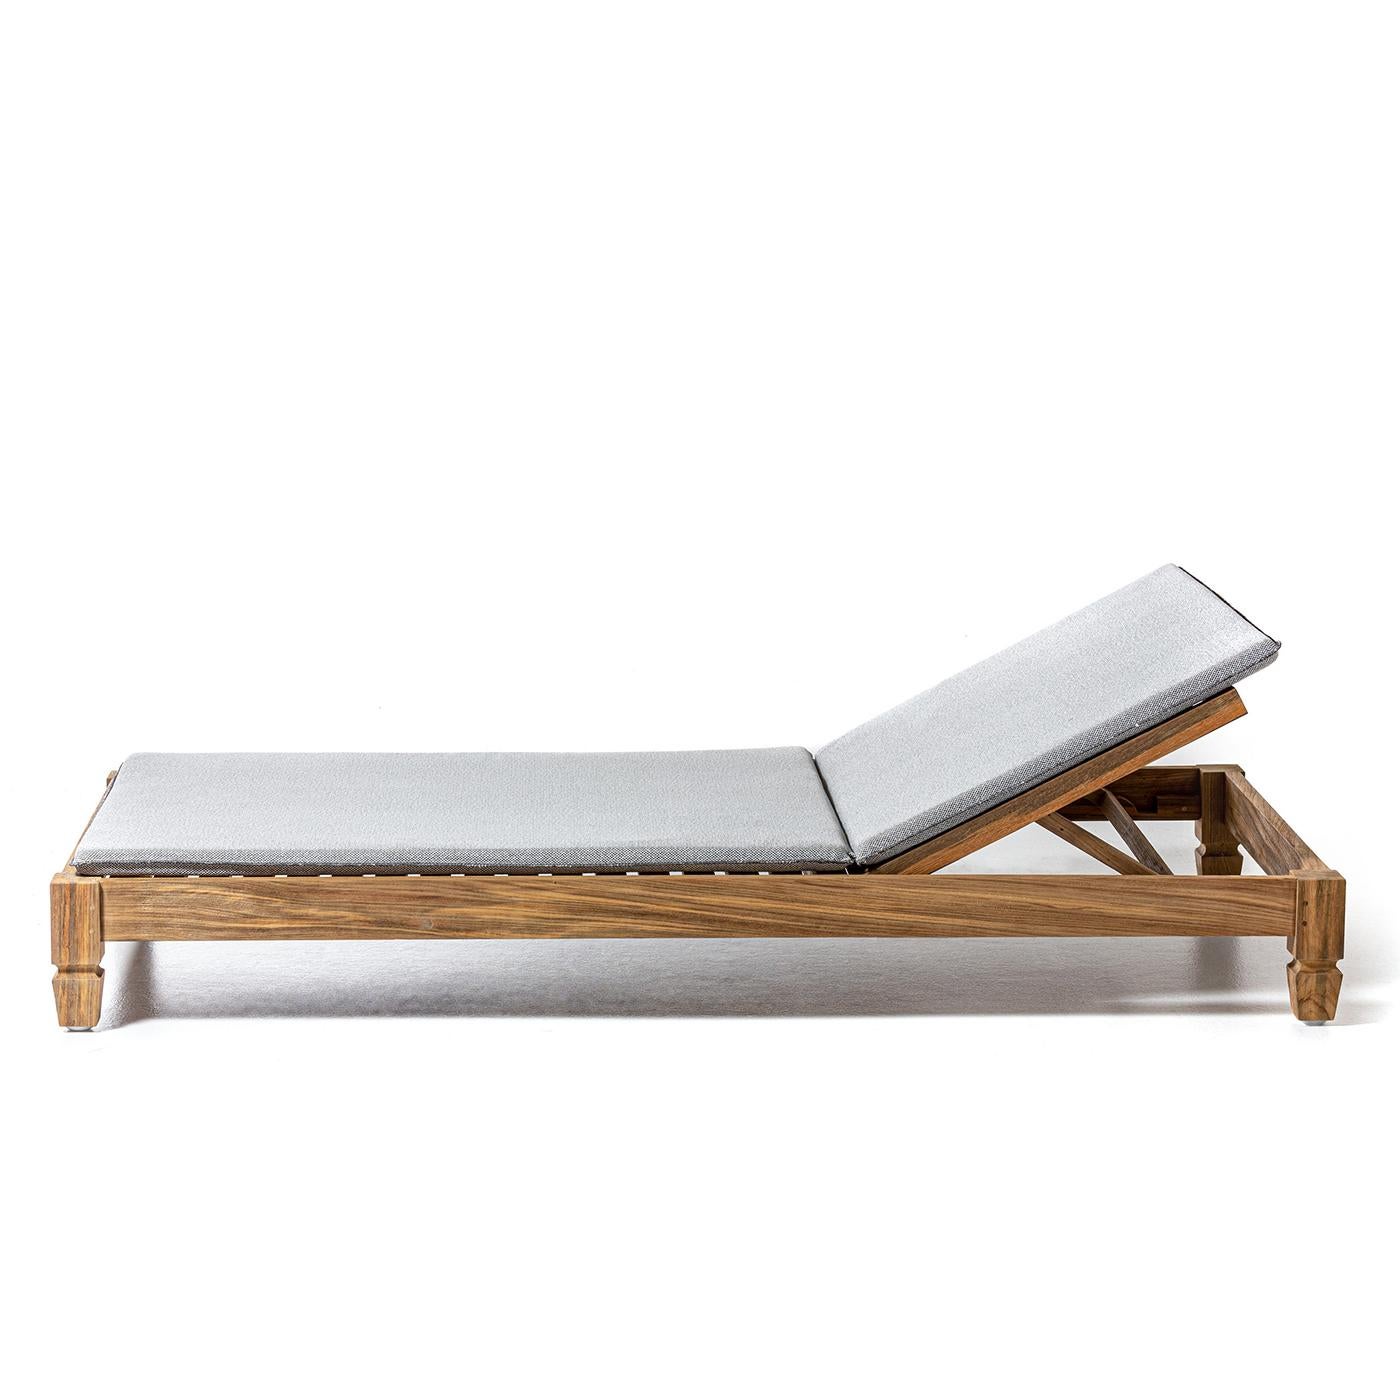 Daybed Barletta with structure in solid teak
wood, with adjustable head backrest. With
cushion included, in outdoor fabric in grey finish
and with removable cover.